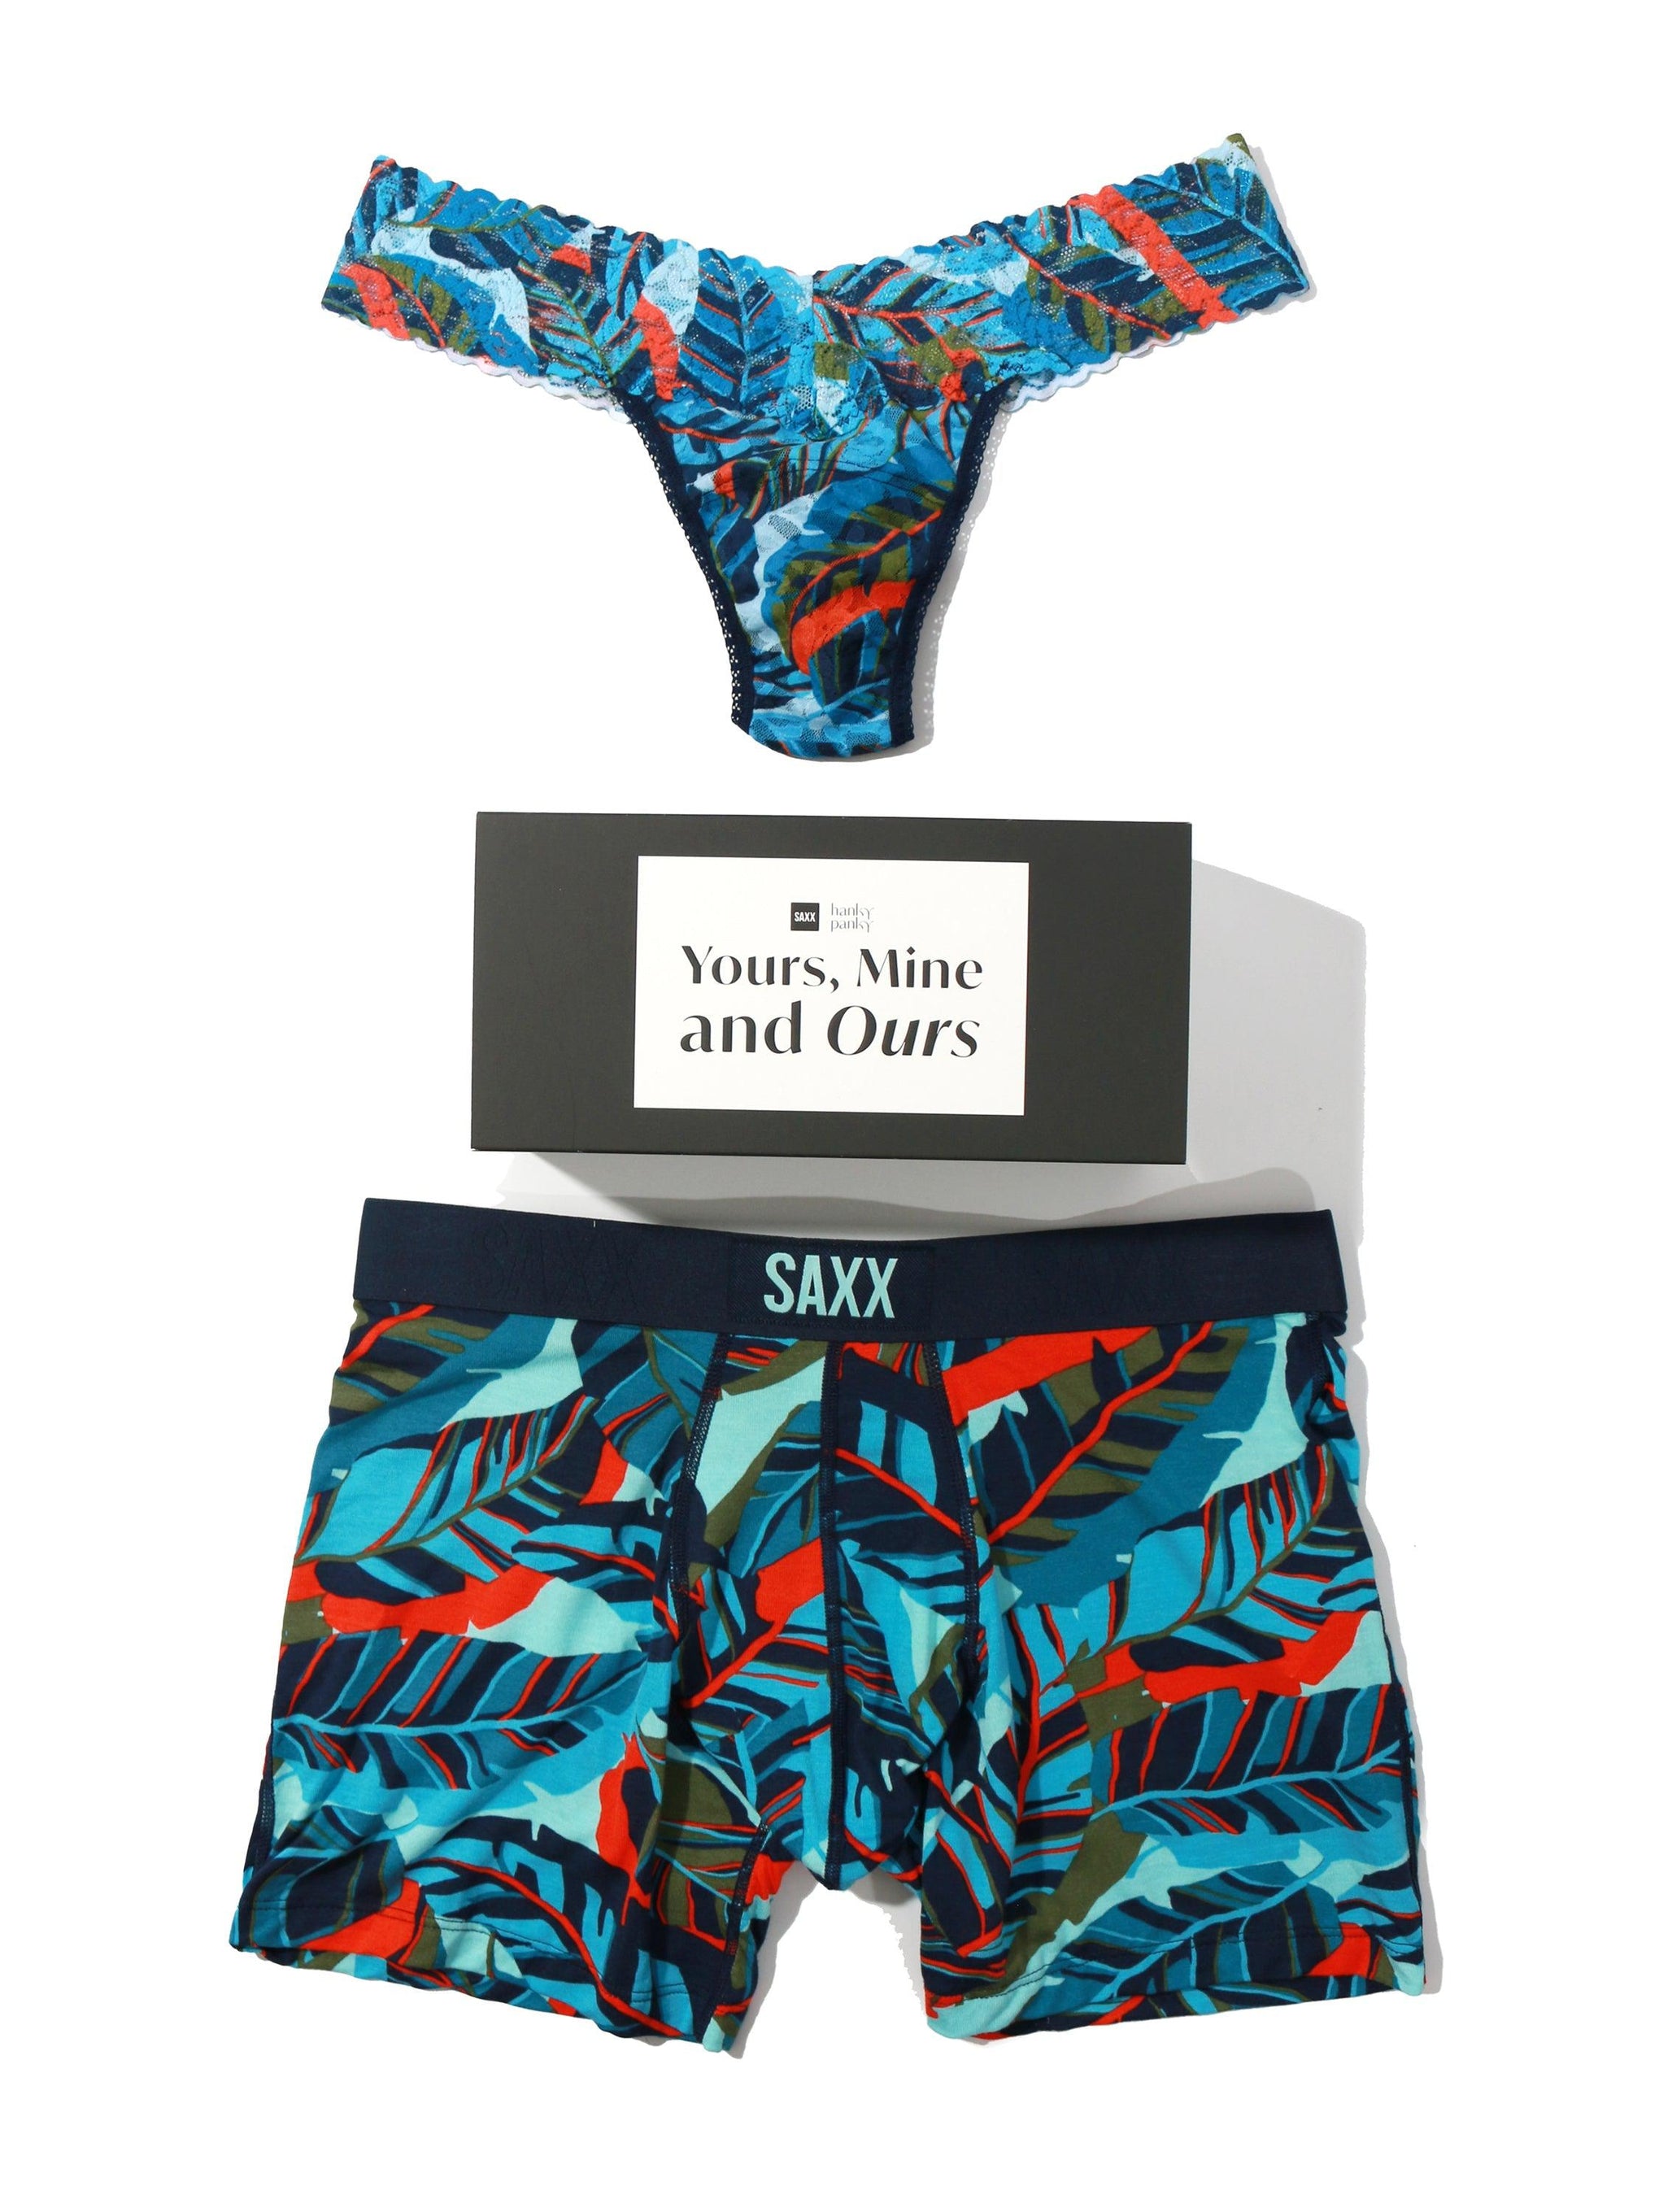 Gift him comfort this holiday with Saxx Underwear! Perfect for his